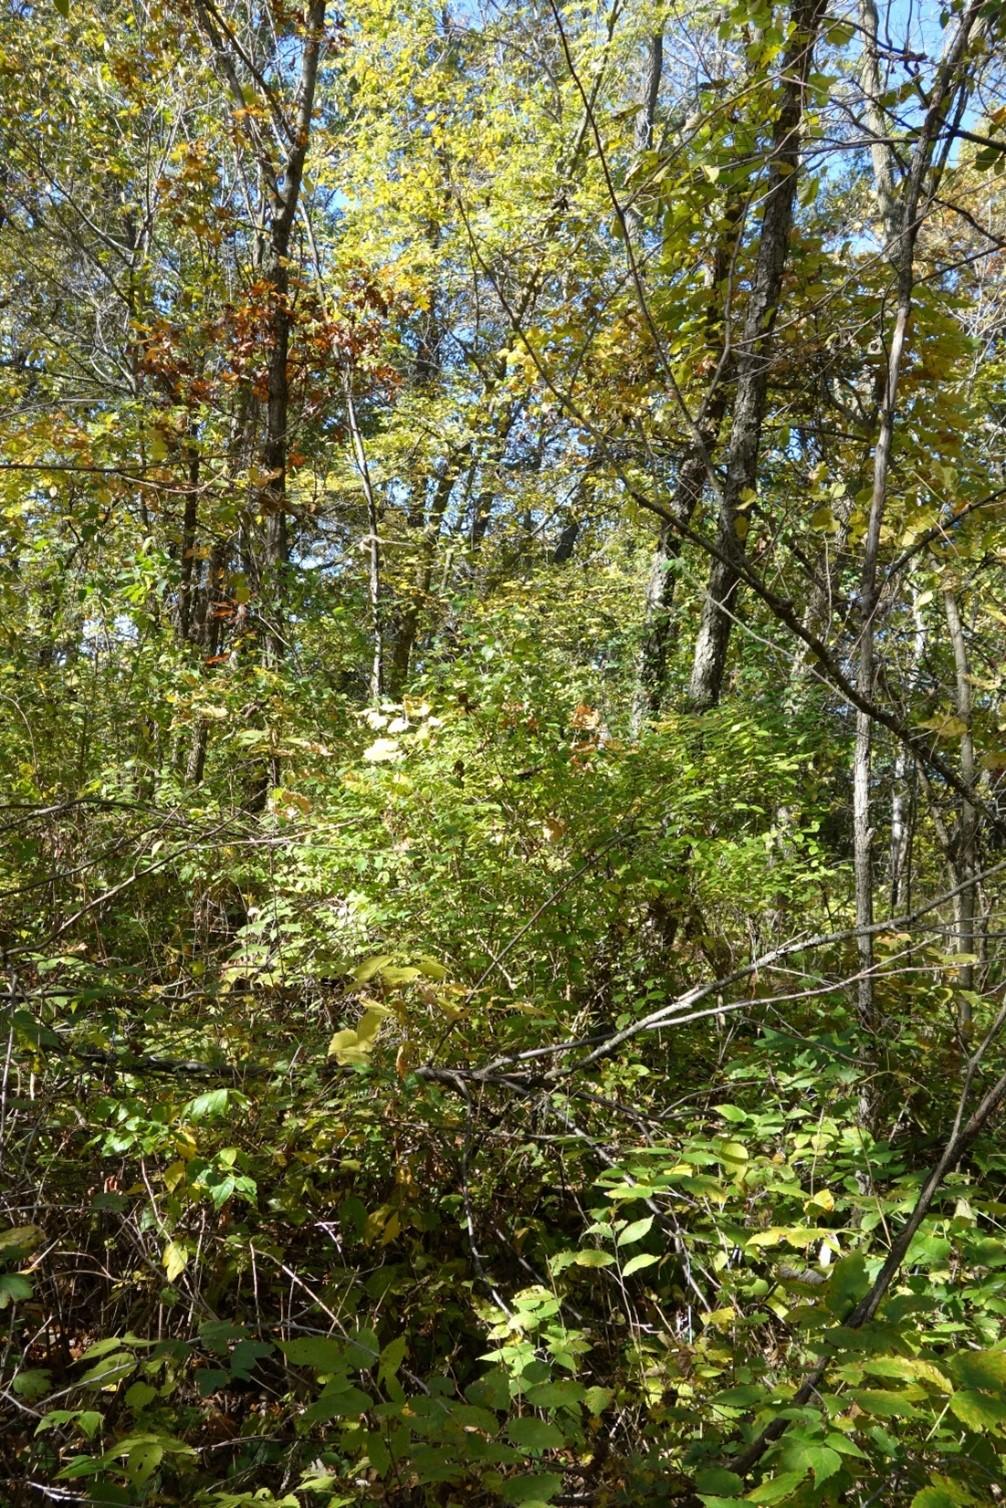 A 2020 photo of a portion of the stand that had a clearcut with reserves harvest in 1995/96. The stand was quite variable in overstory density and species composition as of 2020